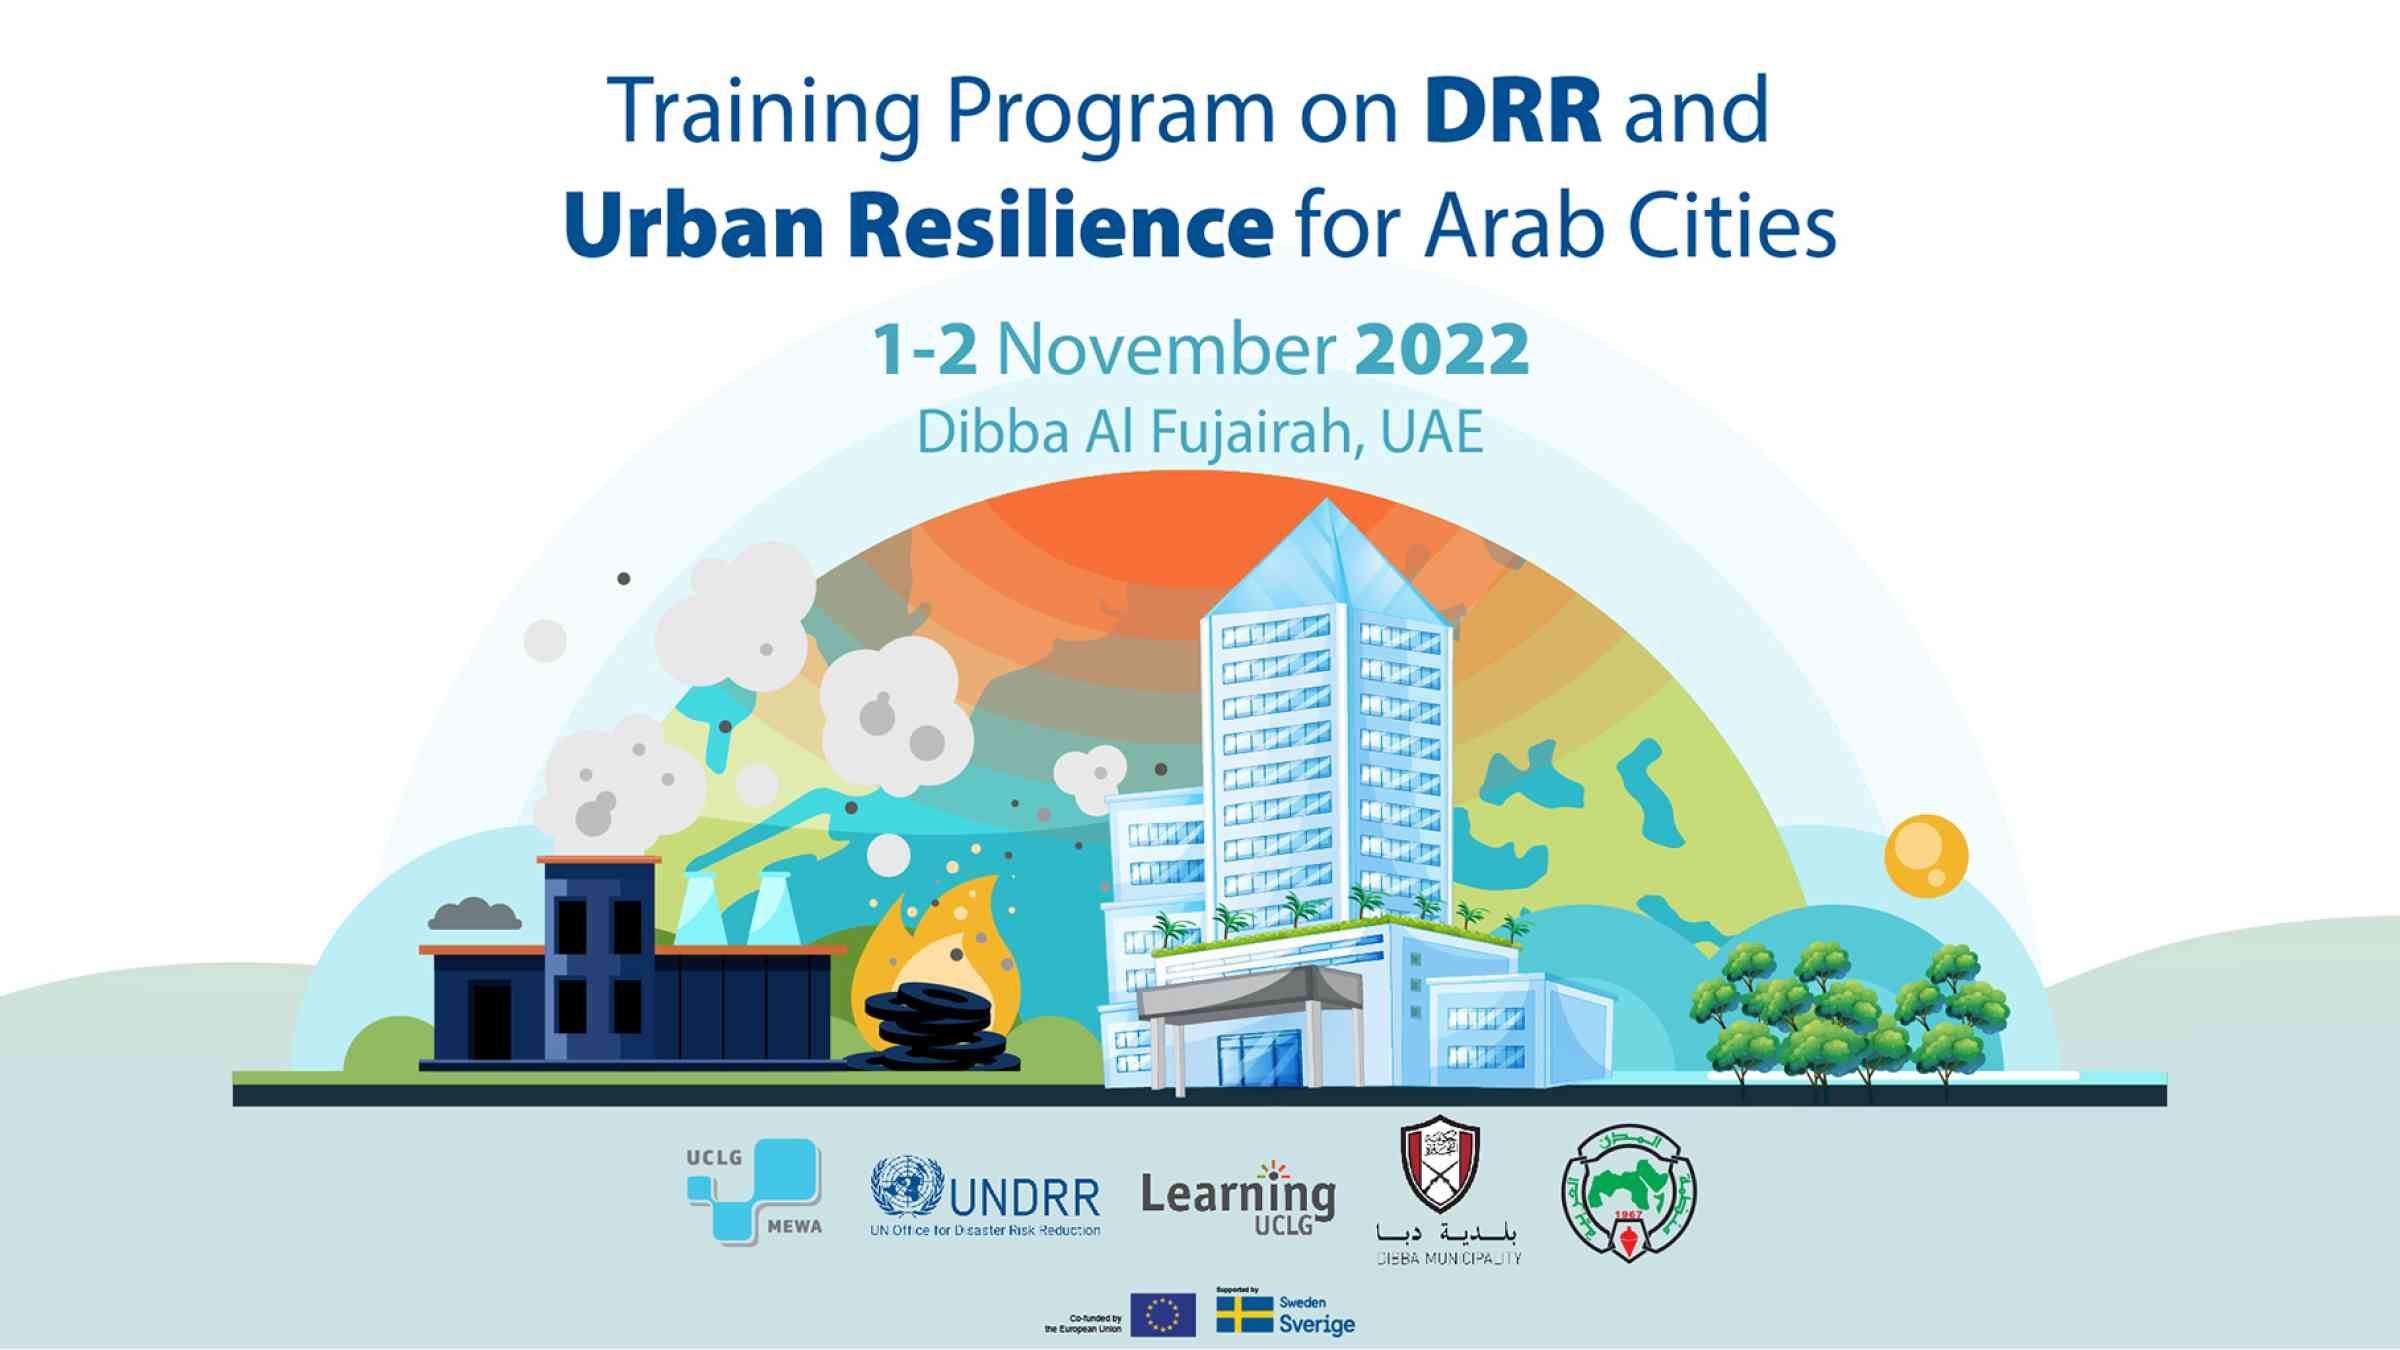 DRR and Urban Resilience Training